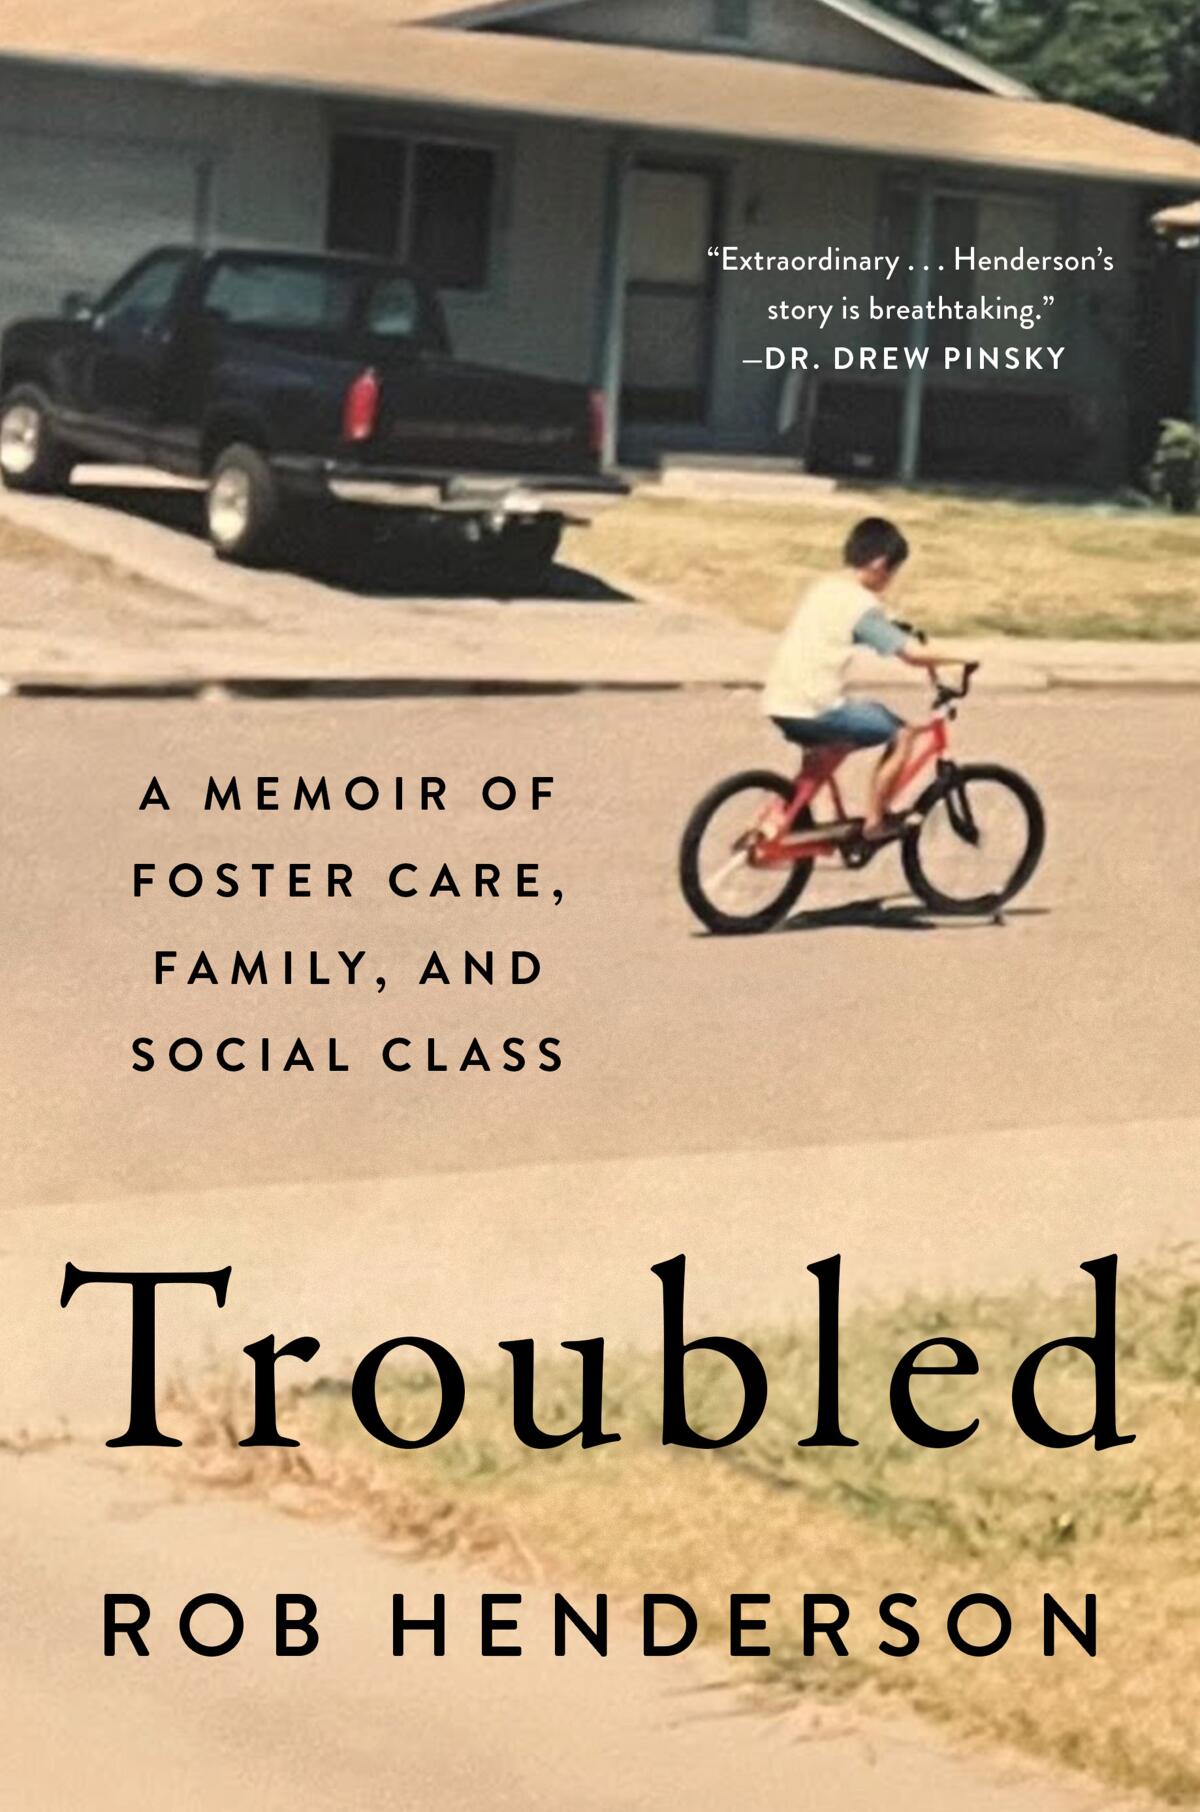 'Troubled: A Memoir of Foster Care, Family, and Social Class' by Rob Henderson